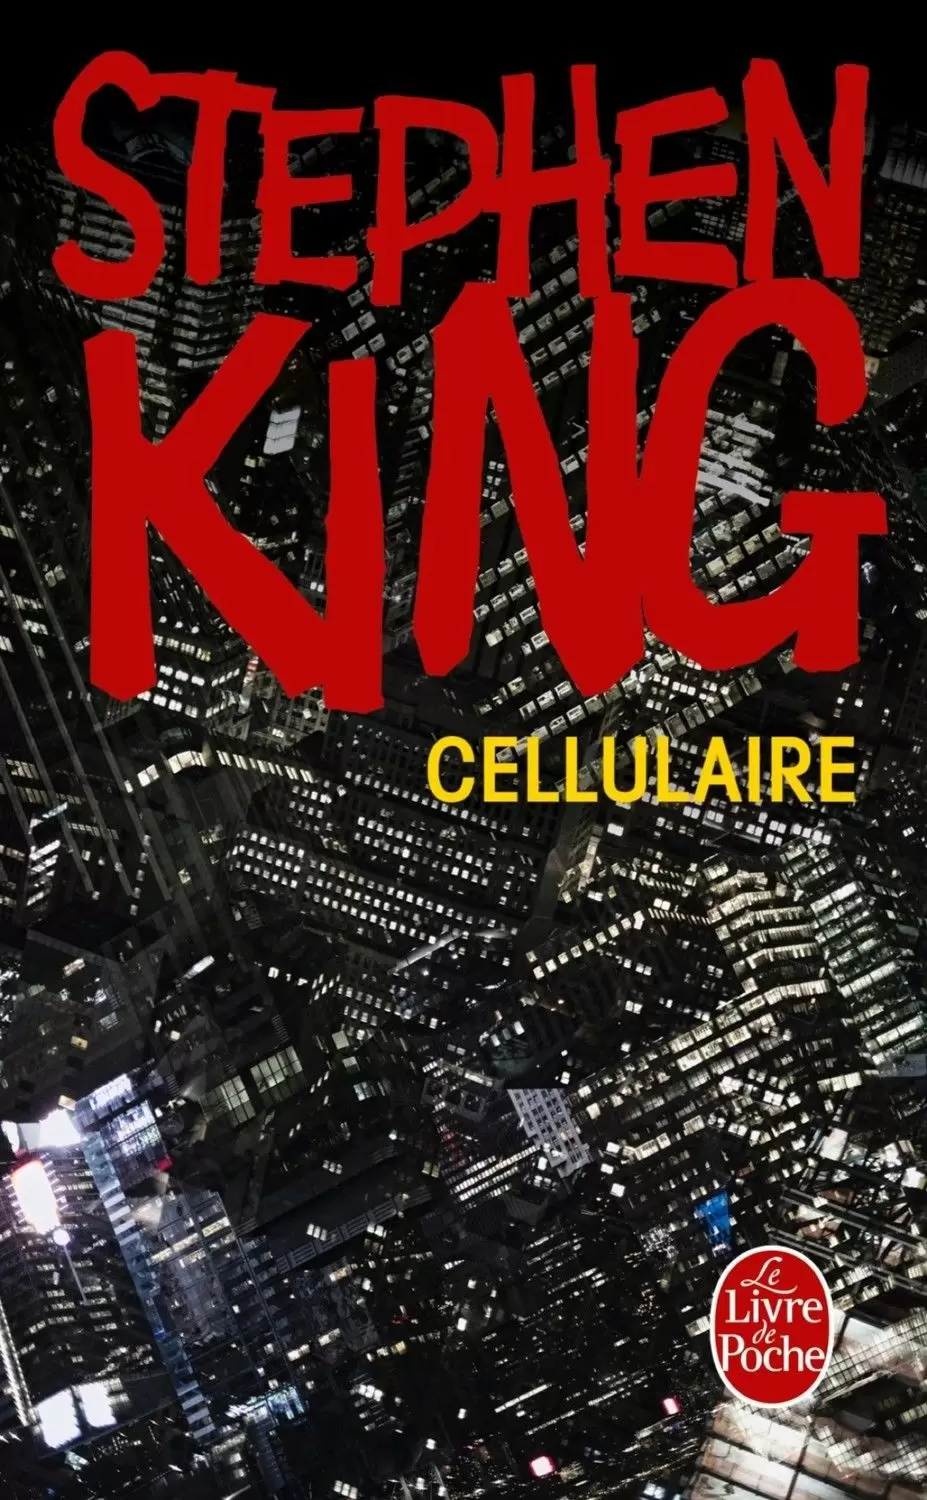 Stephen King - Cellulaire